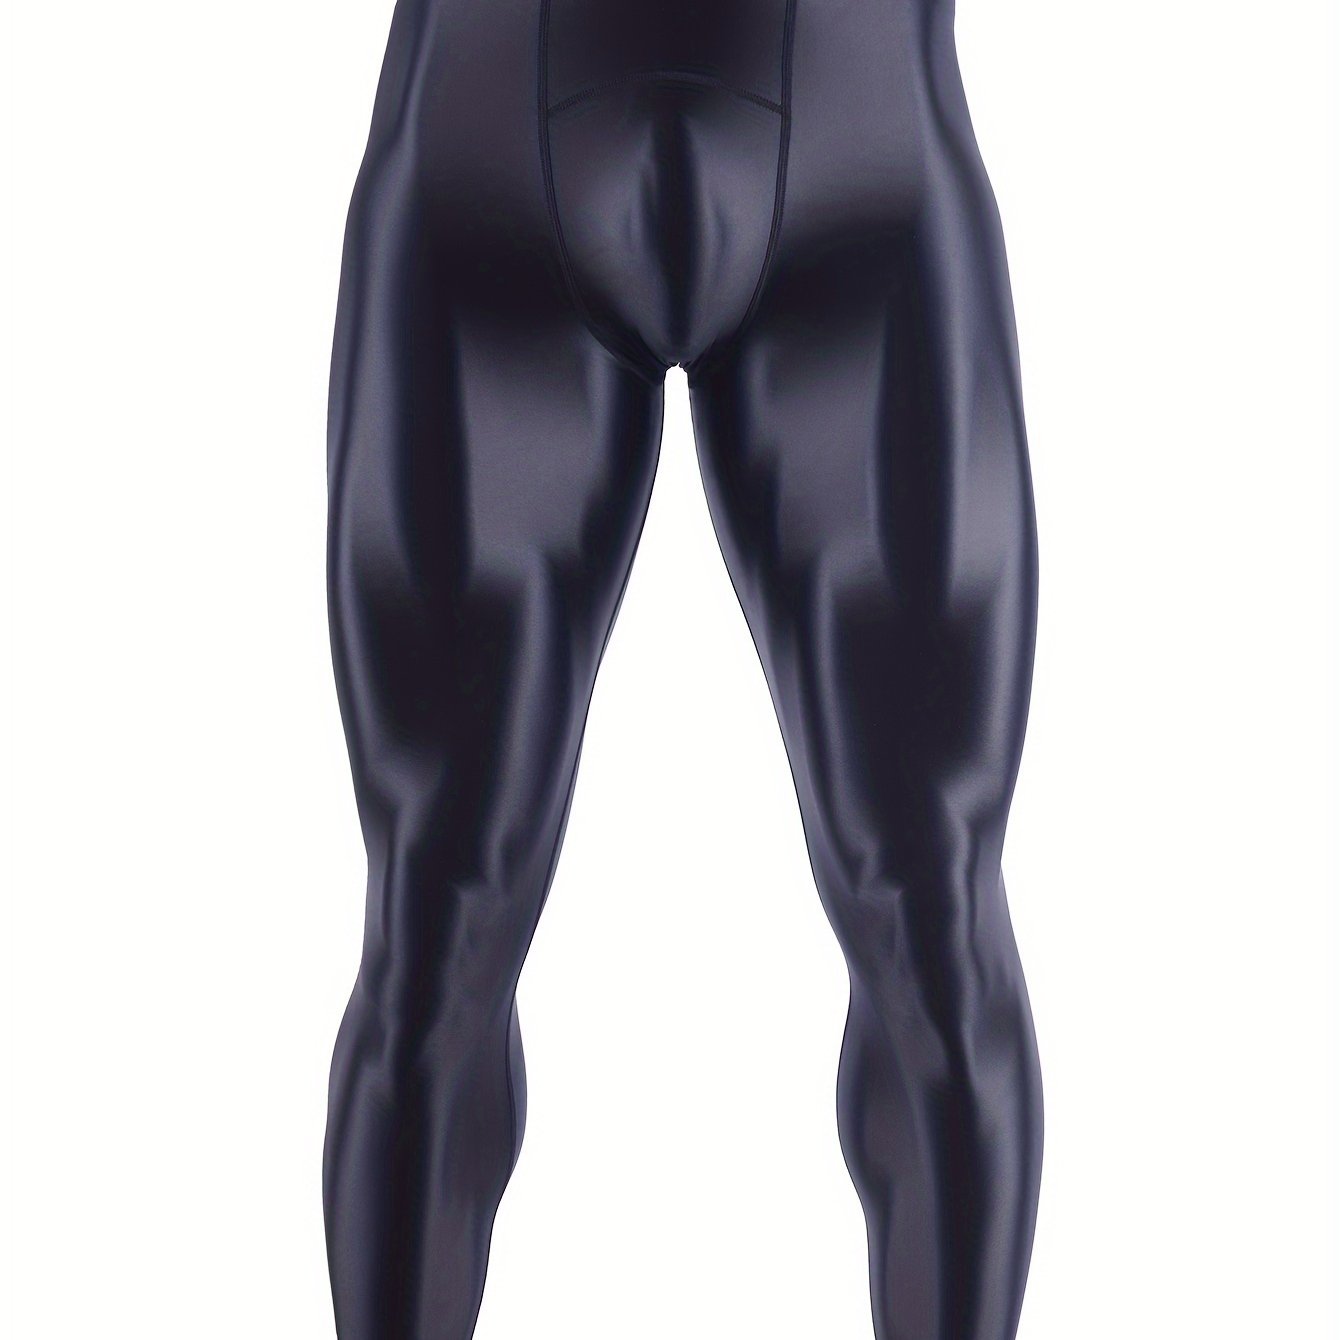  winying Men's Oil Glossy Compression Pants Shiny